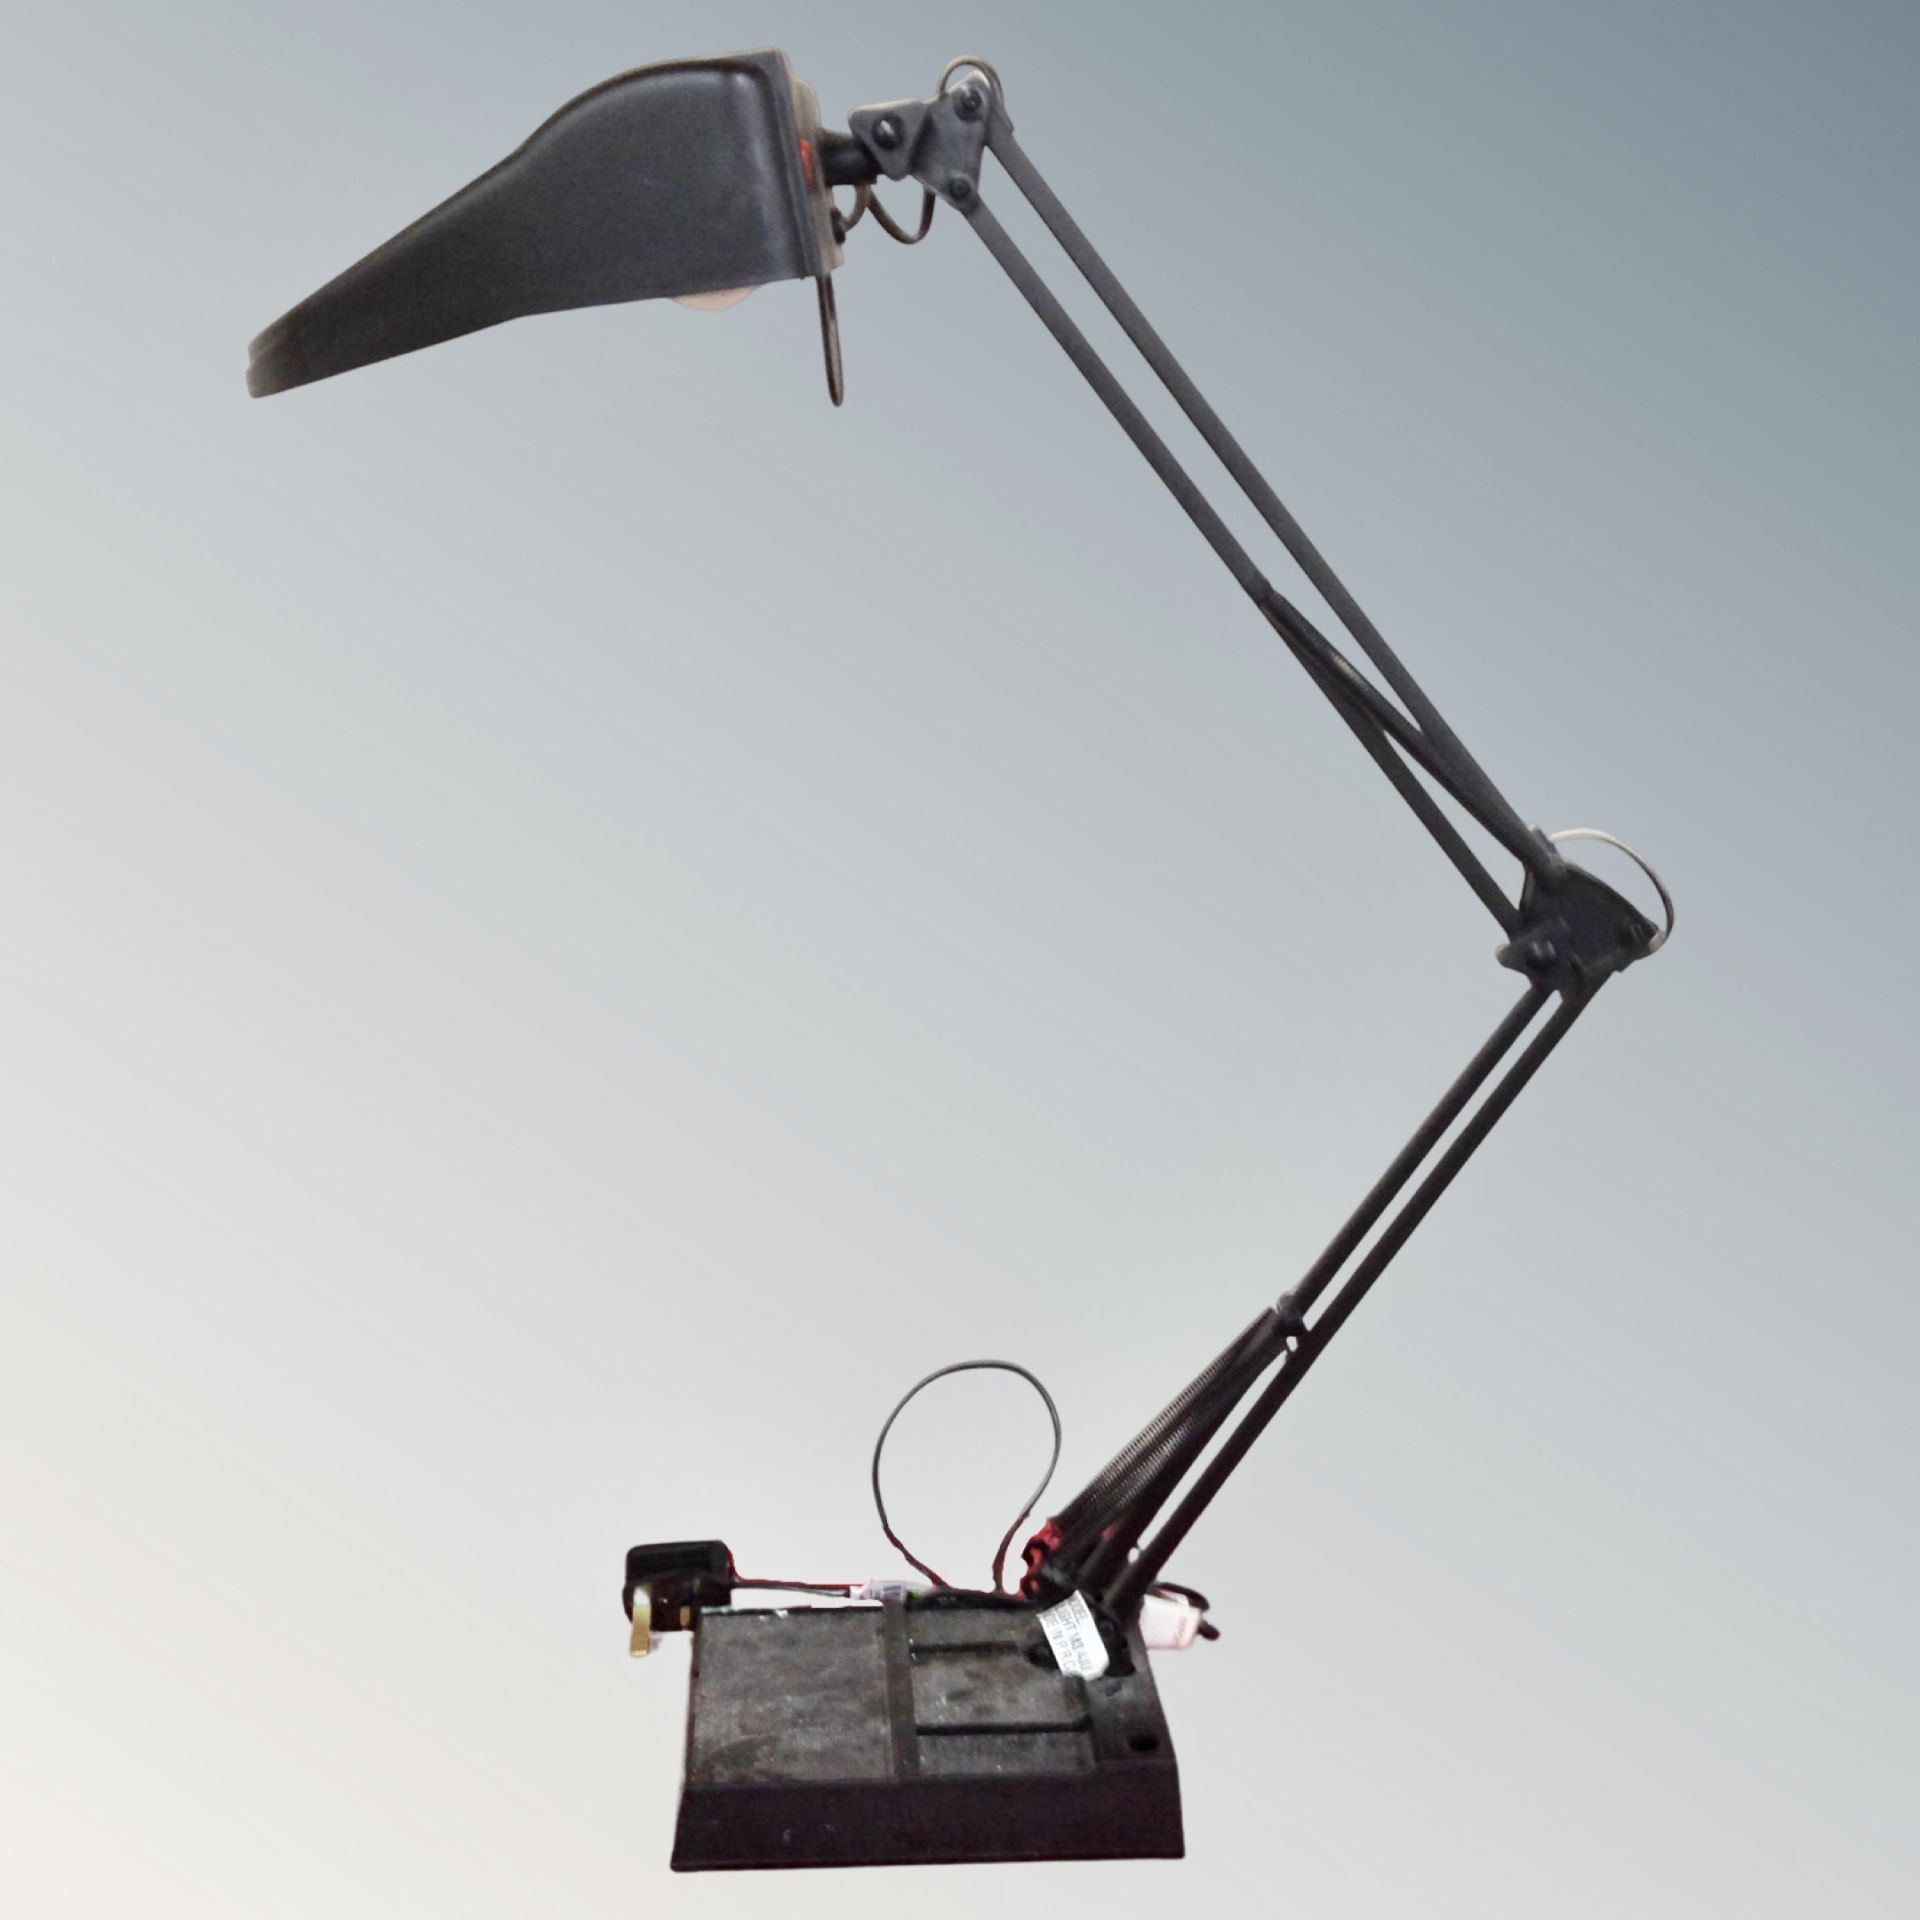 An angle poised reading lamp